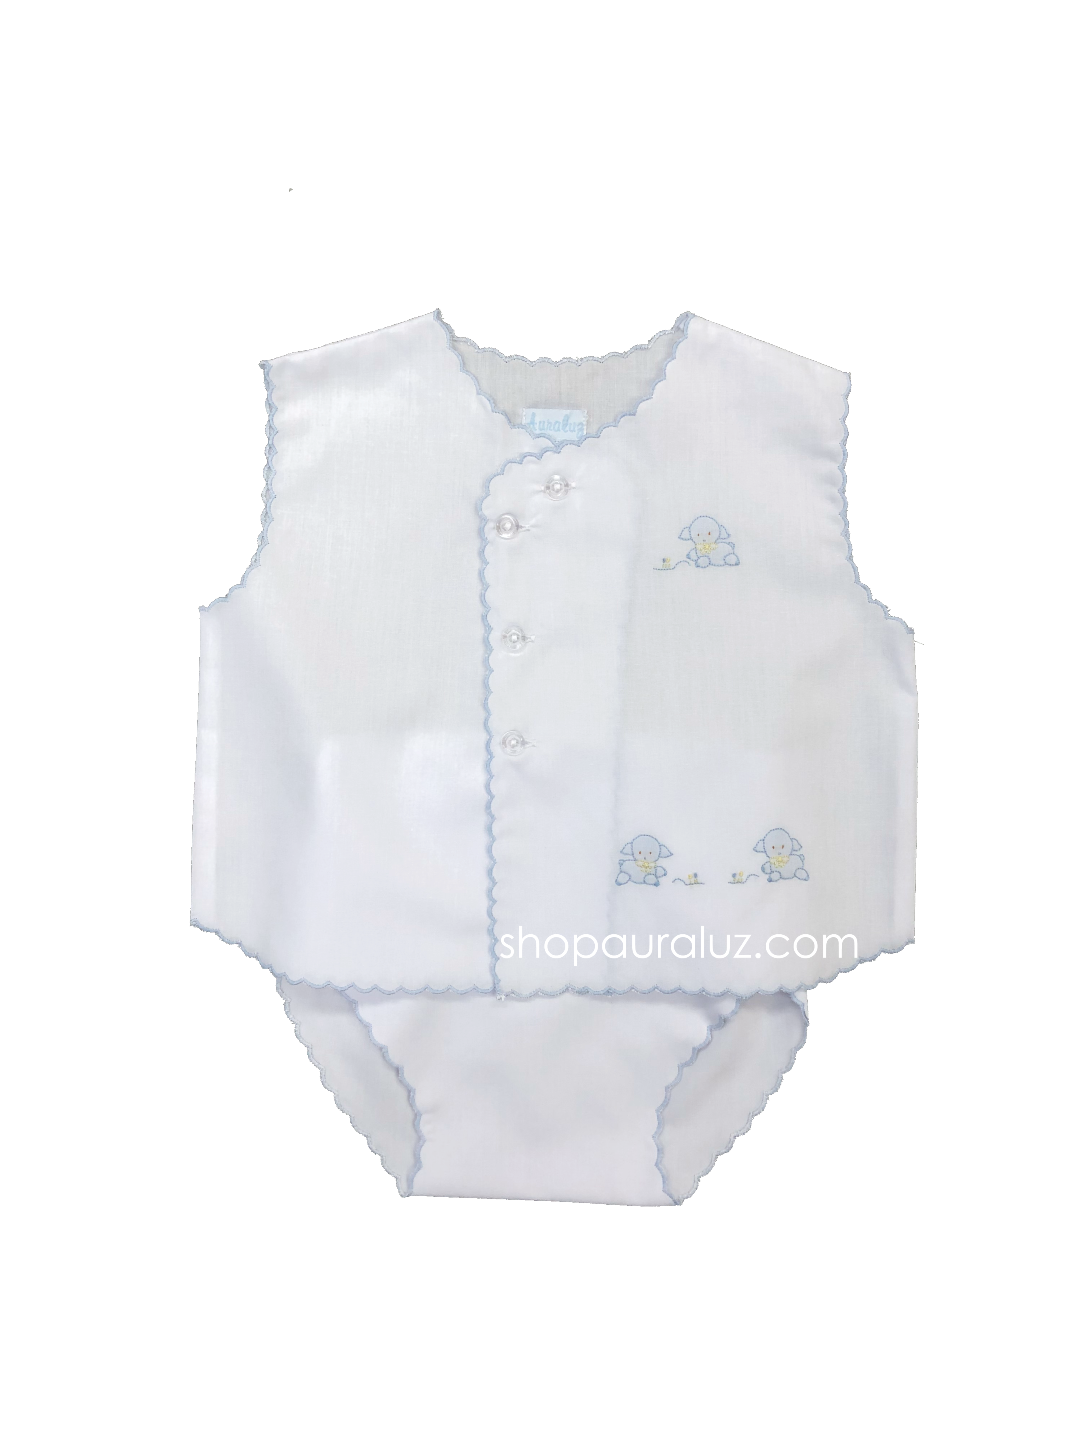 Auraluz Sleeveless Diaper shirt/cover set...White with blue scallops and embroidered tiny lambs